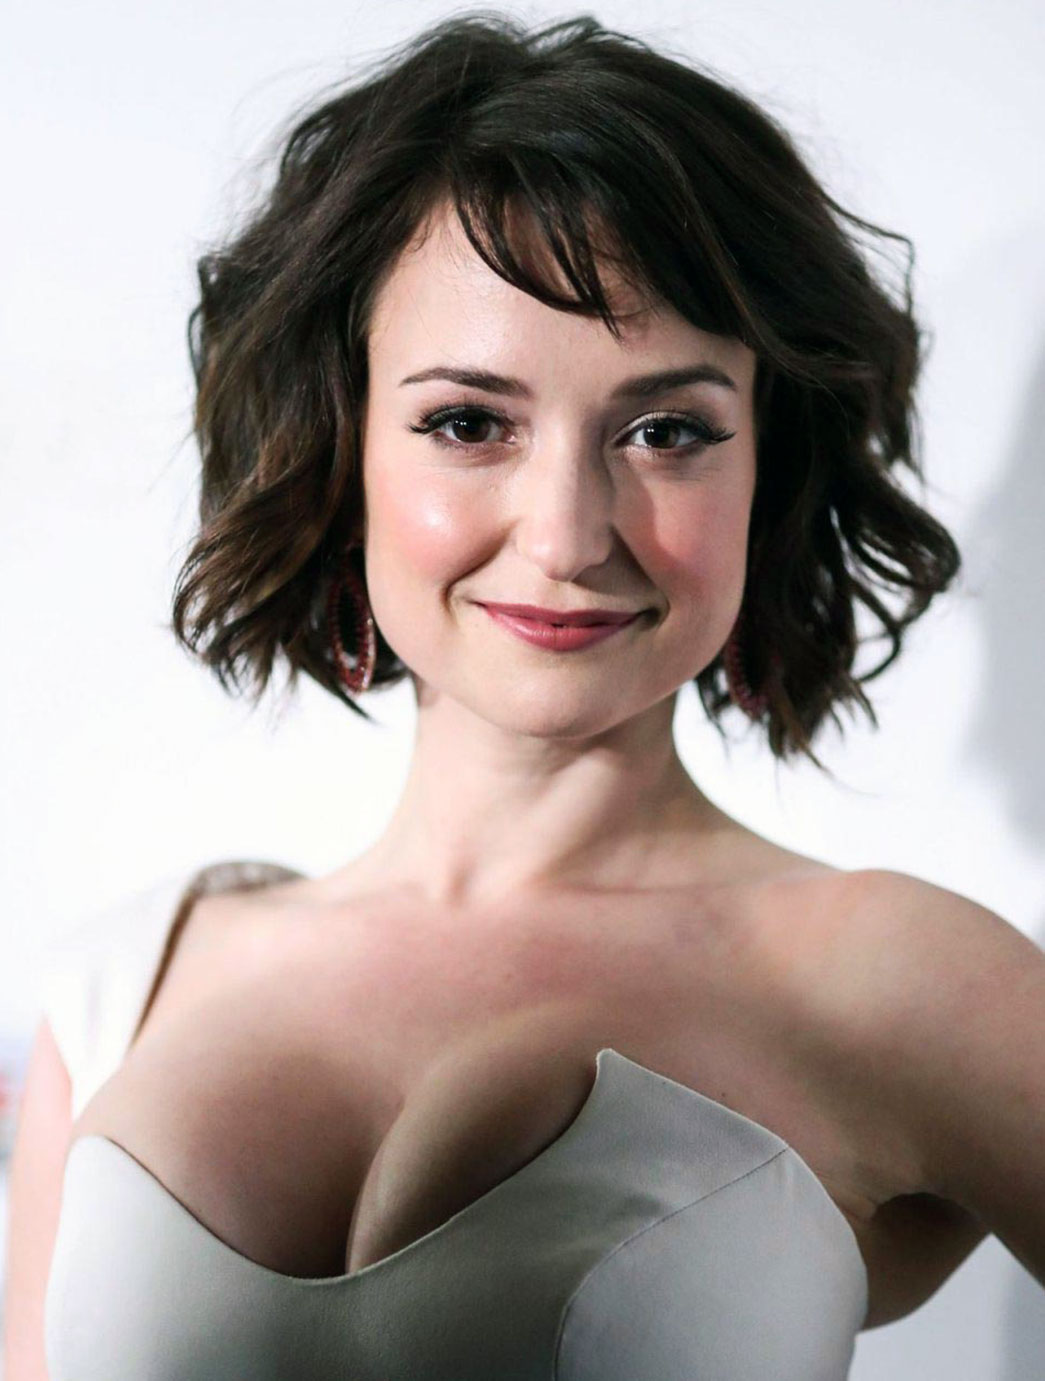 Milana Vayntrub nude leaked sexy topless hot naked cleavage44